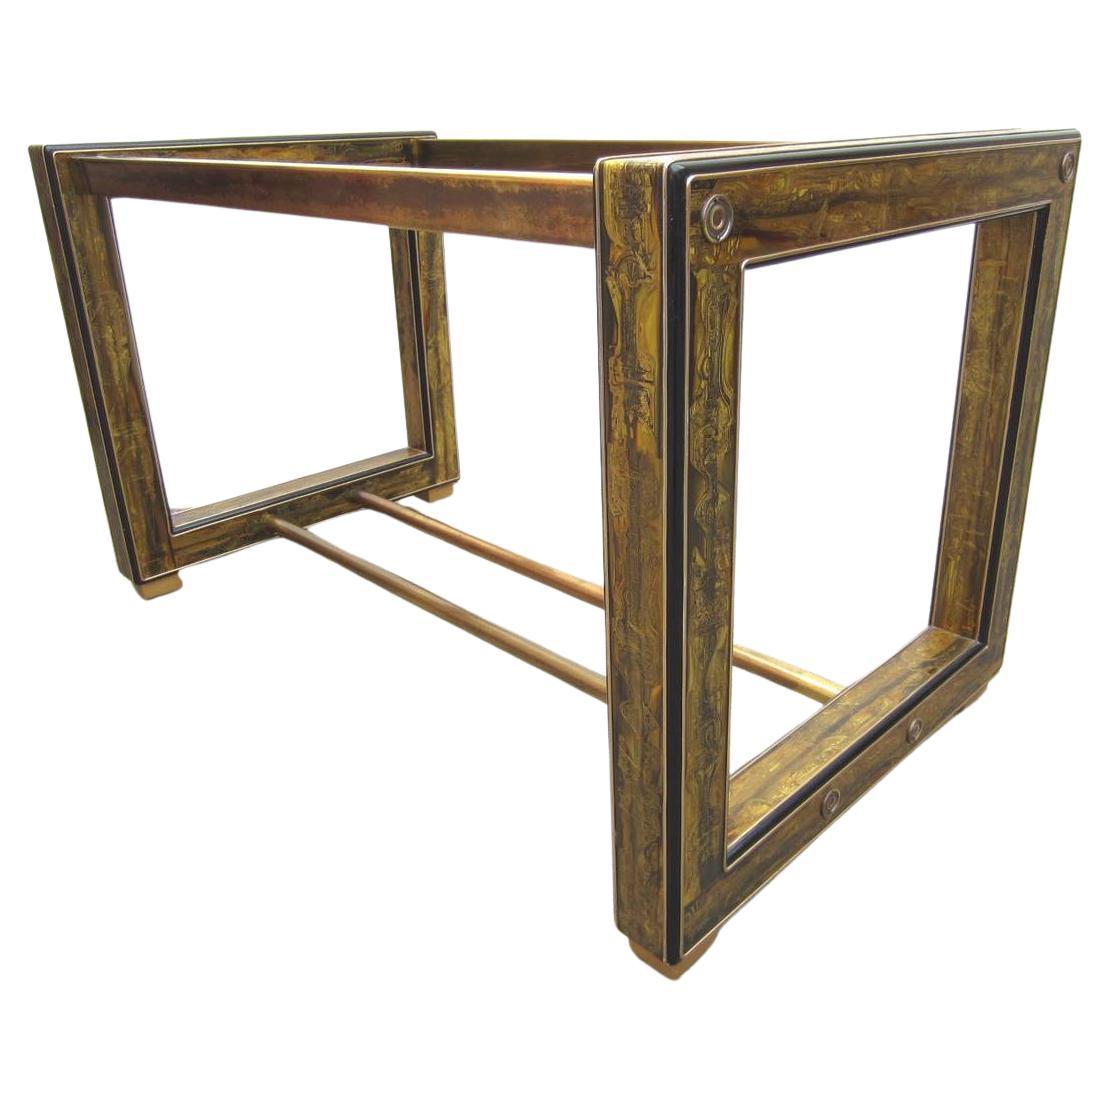 Designed by Bernhard Rohne for Mastercraft furniture this acid etched brass desk or dining table is a true work of art and statement piece, circa 1970s.
Depending on size of glass top this serves well as an executive desk or large dining table.
It